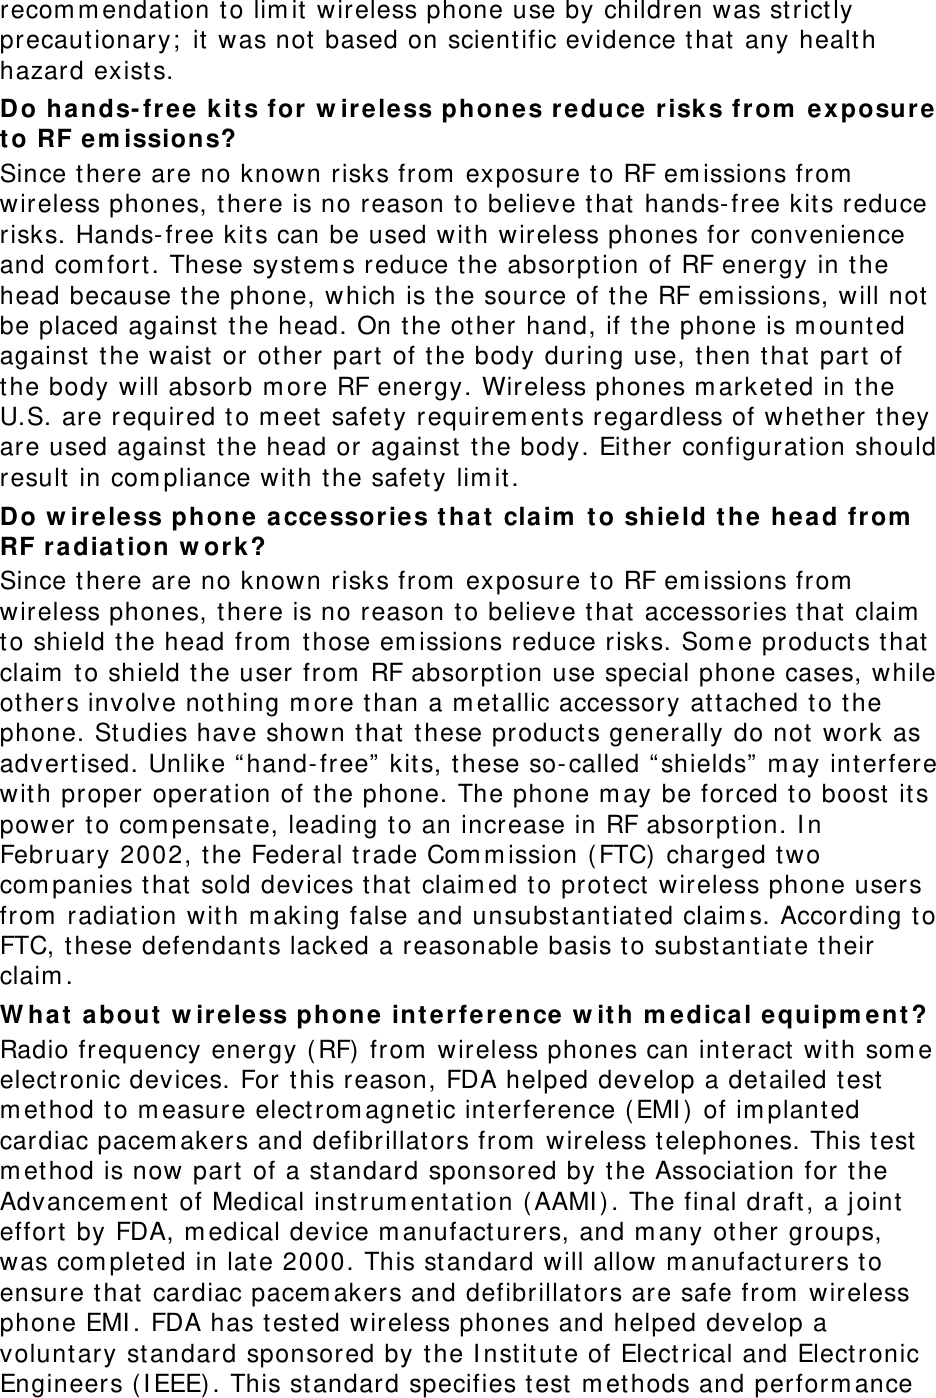 recom m endation to lim it  wireless phone use by children was strict ly precaut ionary;  it was not based on scientific evidence t hat  any healt h hazard exist s.   Do hands-fr ee  k it s for w irele ss phones r educe risk s from  exposure t o RF em ission s? Since t here are no known risks from  exposure to RF em issions from  wireless phones, t here is no reason t o believe t hat  hands-free kits reduce risks. Hands-free kit s can be used w it h wir eless phones for convenience and com fort . These syst em s reduce t he absorpt ion of RF energy in the head because t he phone, which is t he source of the RF em issions, w ill not  be placed against  t he head. On the other hand, if t he phone is m ount ed against  t he waist  or ot her part  of the body during use, t hen t hat part  of the body will absorb m ore RF energy. Wireless phones m arket ed in t he U.S. are required t o m eet  safet y requirem ents regardless of whether t hey are used against  t he head or against  t he body. Eit her configurat ion should result  in com pliance with t he safety lim it. Do w ireless phon e a cce ssor ies t ha t  cla im  t o shield t h e he ad fr om  RF r adia t ion w or k? Since t here are no known risks from  exposure to RF em issions from  wireless phones, t here is no reason t o believe that  accessories t hat  claim  to shield the head from  t hose em issions reduce risks. Som e product s t hat  claim  to shield t he user from  RF absorpt ion use special phone cases, while ot hers involve not hing m ore t han a m et allic accessor y at tached to t he phone. St udies have shown t hat t hese products generally do not  work as advert ised. Unlike “ hand-free”  kit s, t hese so-called “ shields”  m ay int erfere wit h proper operat ion of the phone. The phone m ay be forced t o boost it s power  to com pensat e, leading to an increase in RF absorption. I n February 2002, t he Federal trade Com m ission ( FTC) charged two com panies t hat sold devices t hat  claim ed to prot ect  wireless phone users from  radiation wit h m aking false and unsubst ant iated claim s. According to FTC, these defendant s lacked a reasonable basis to subst ant iate their claim . W h at  about  w ir eless phon e int e rfer ence  w it h m e dical equipm e nt ? Radio frequency energy ( RF)  from  wireless phones can int eract wit h som e elect ronic devices. For this reason, FDA helped develop a detailed t est  m ethod t o m easure elect rom agnet ic int erference ( EMI )  of im planted cardiac pacem akers and defibrillat ors fr om  w ireless t elephones. This t est  m ethod is now part  of a st andard sponsored by t he Association for t he Advancem ent  of Medical inst rum ent at ion ( AAMI ) . The final draft , a j oint  effort  by FDA, m edical device m anufact urers, and m any ot her groups, was com pleted in lat e 2000. This st andar d will allow m anufacturers t o ensure that cardiac pacem akers and defibrillat ors are safe from  wireless phone EMI . FDA has t est ed wireless phones and helped develop a volunt ary standard sponsored by the I nst it ute of Elect rical and Electronic Engineers ( I EEE) . This st andard specifies t est  m et hods and perform ance 